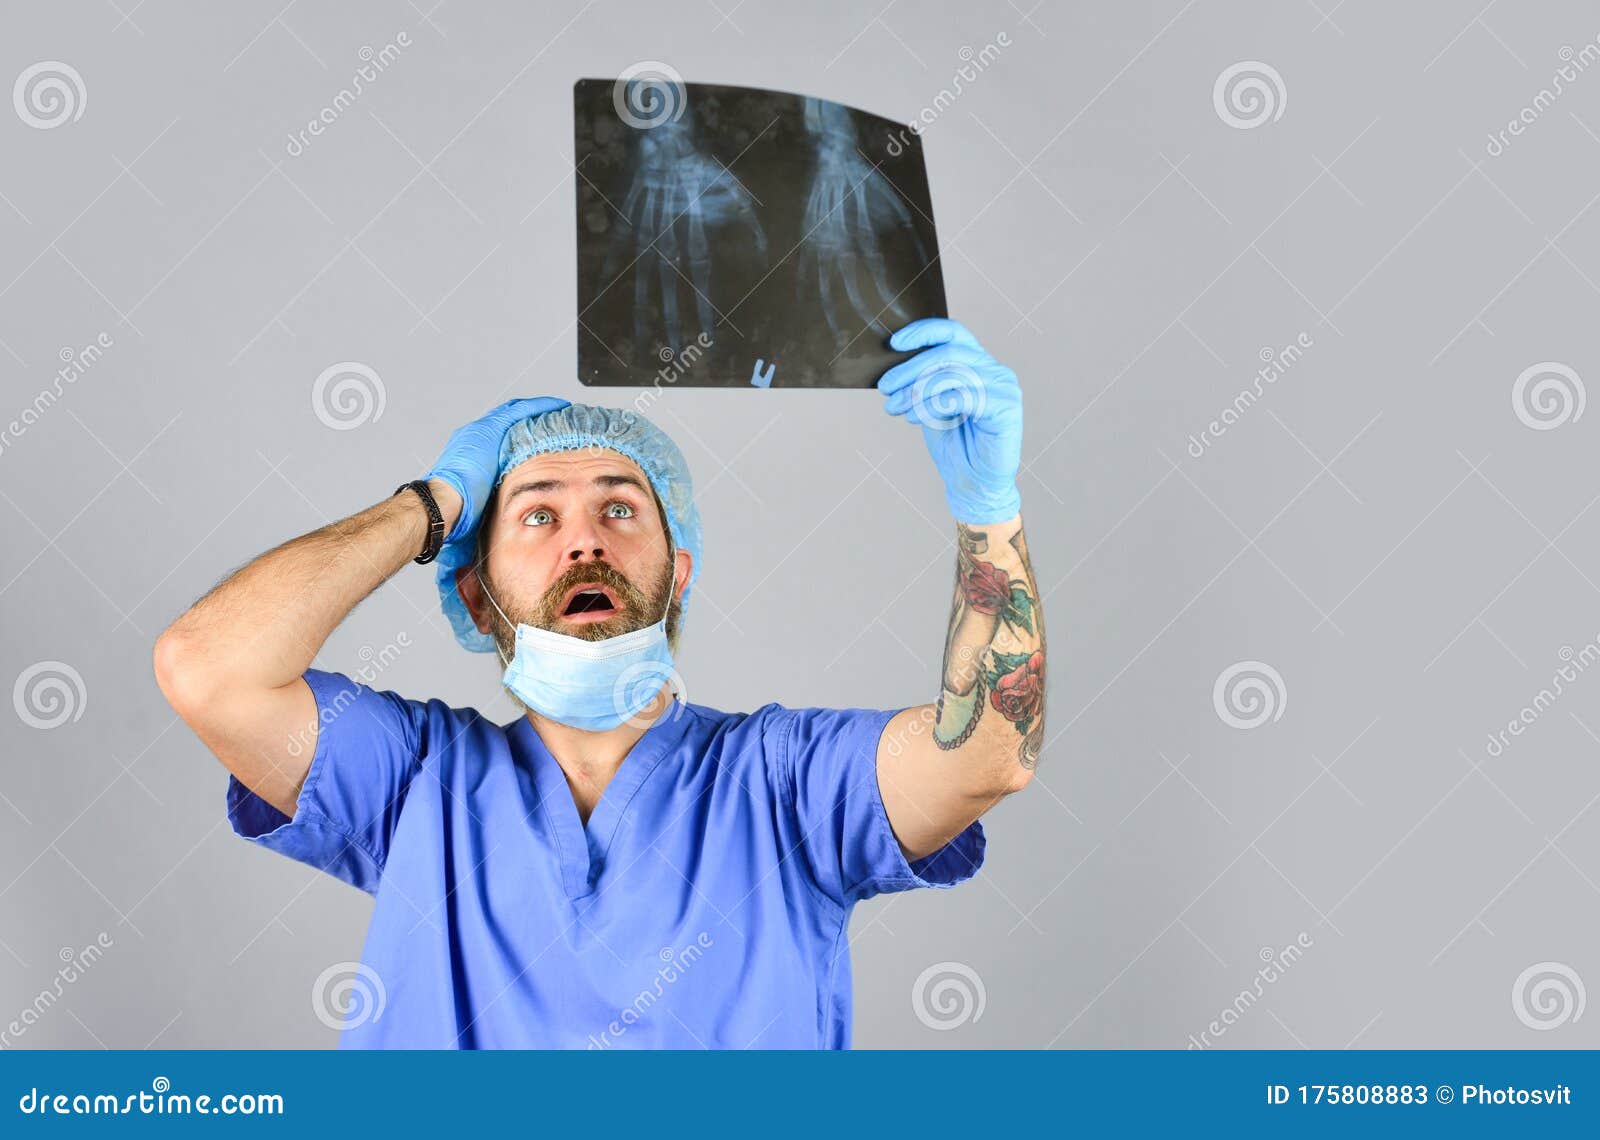 doctor examines radiographic snapshot of wrist. surgeon estimate damages. hospital emergency. doctor compares results. x